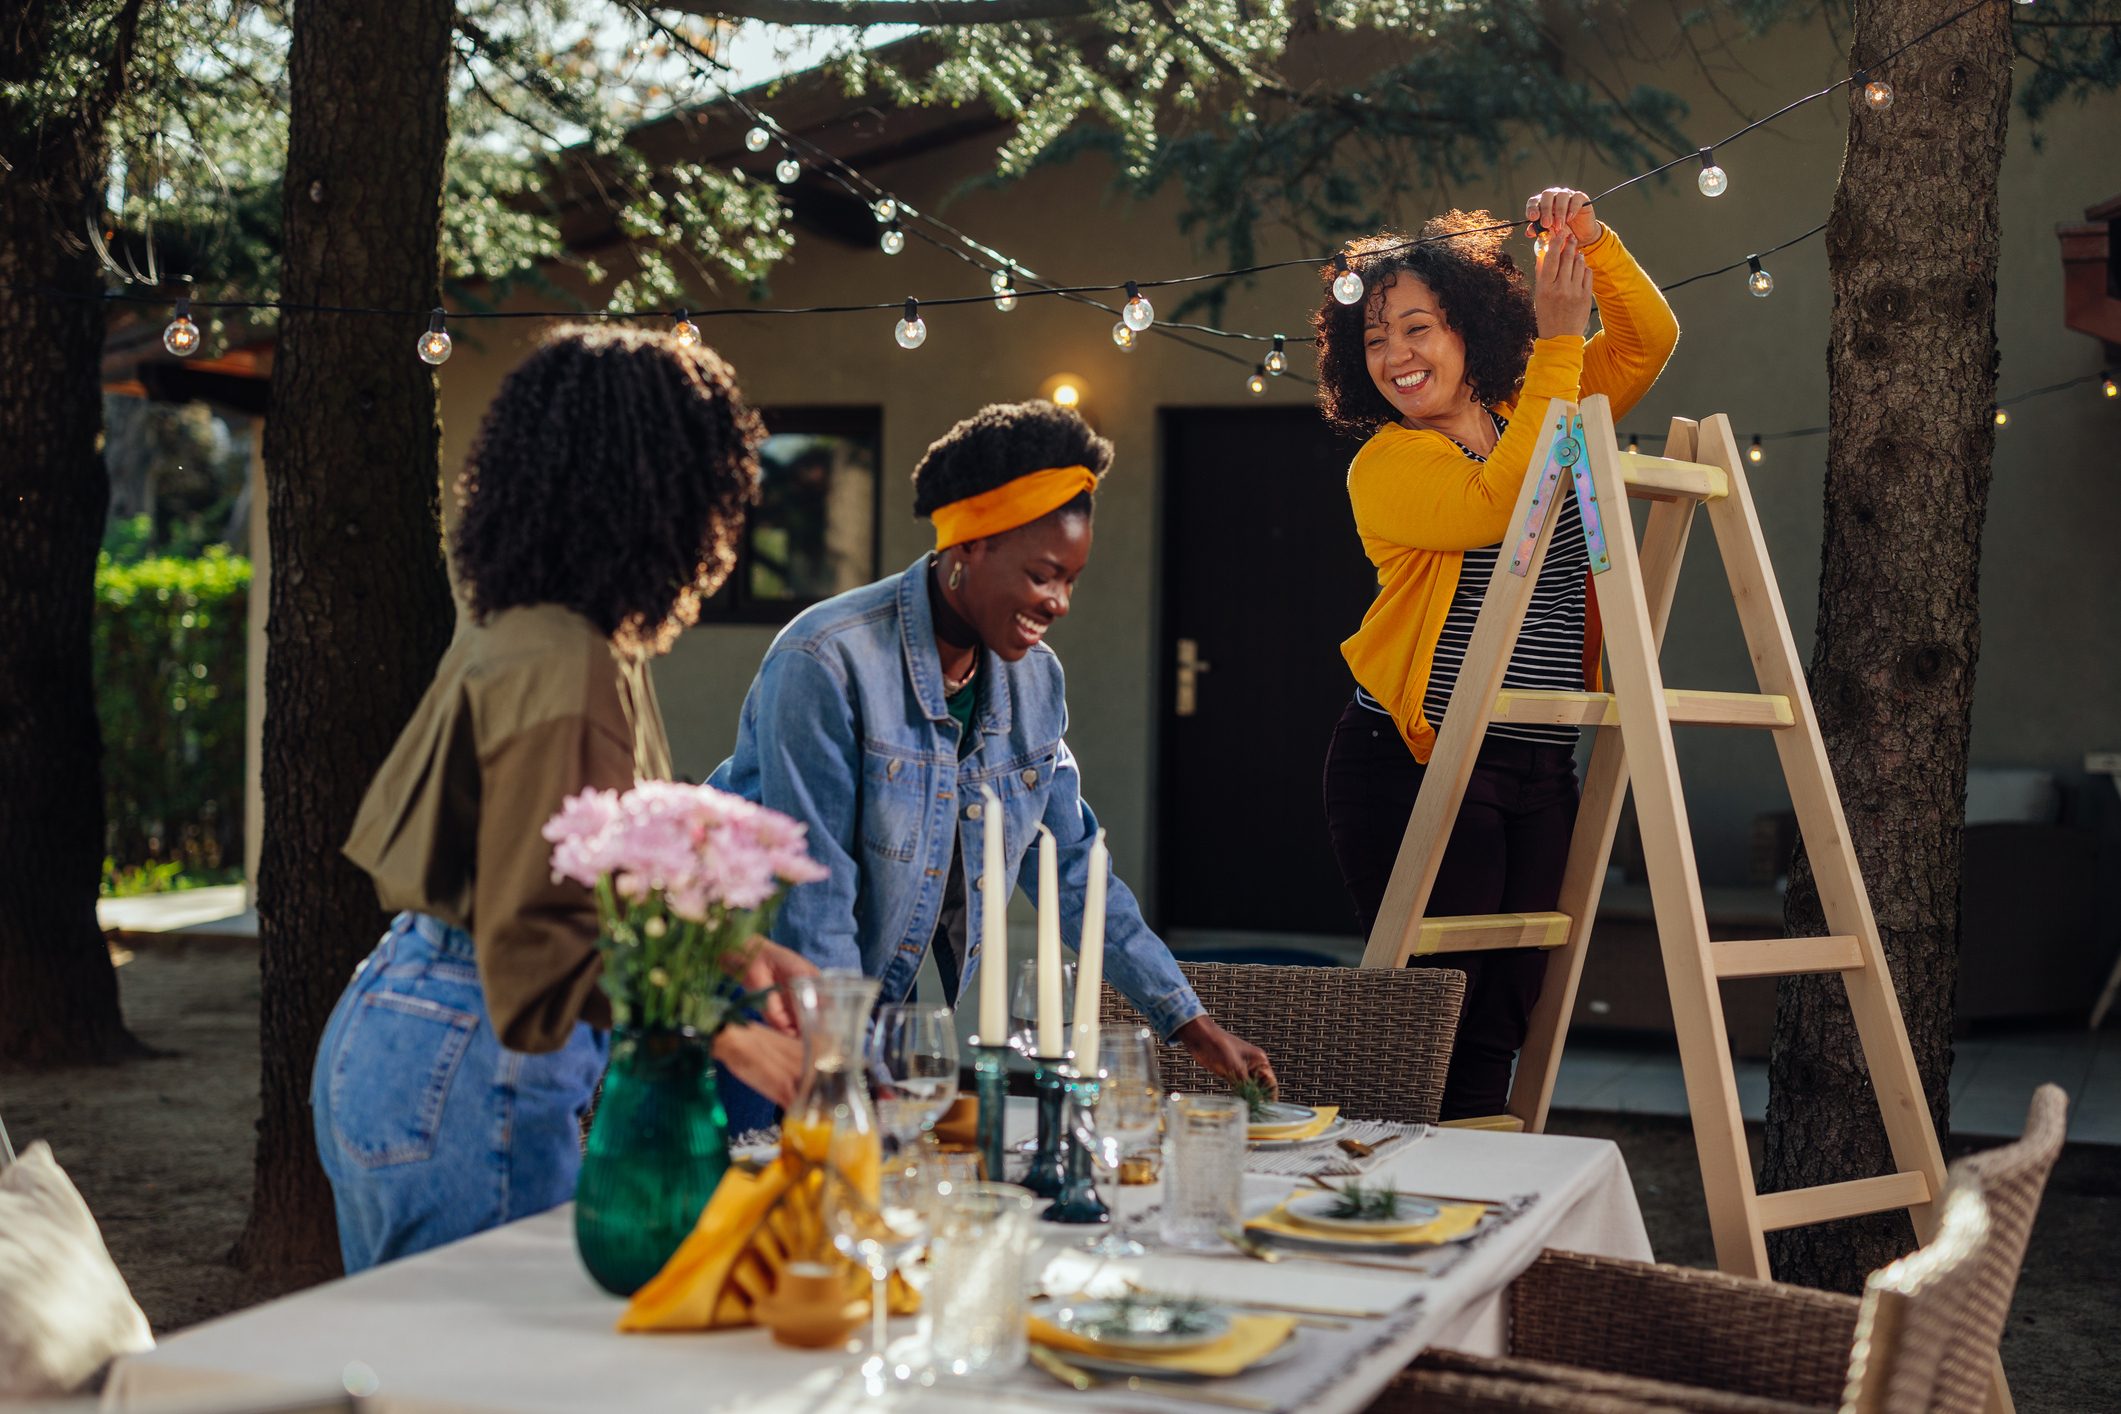 Three women setting a table for an outdoor wedding dinner, one arranging flowers, another with a ladder